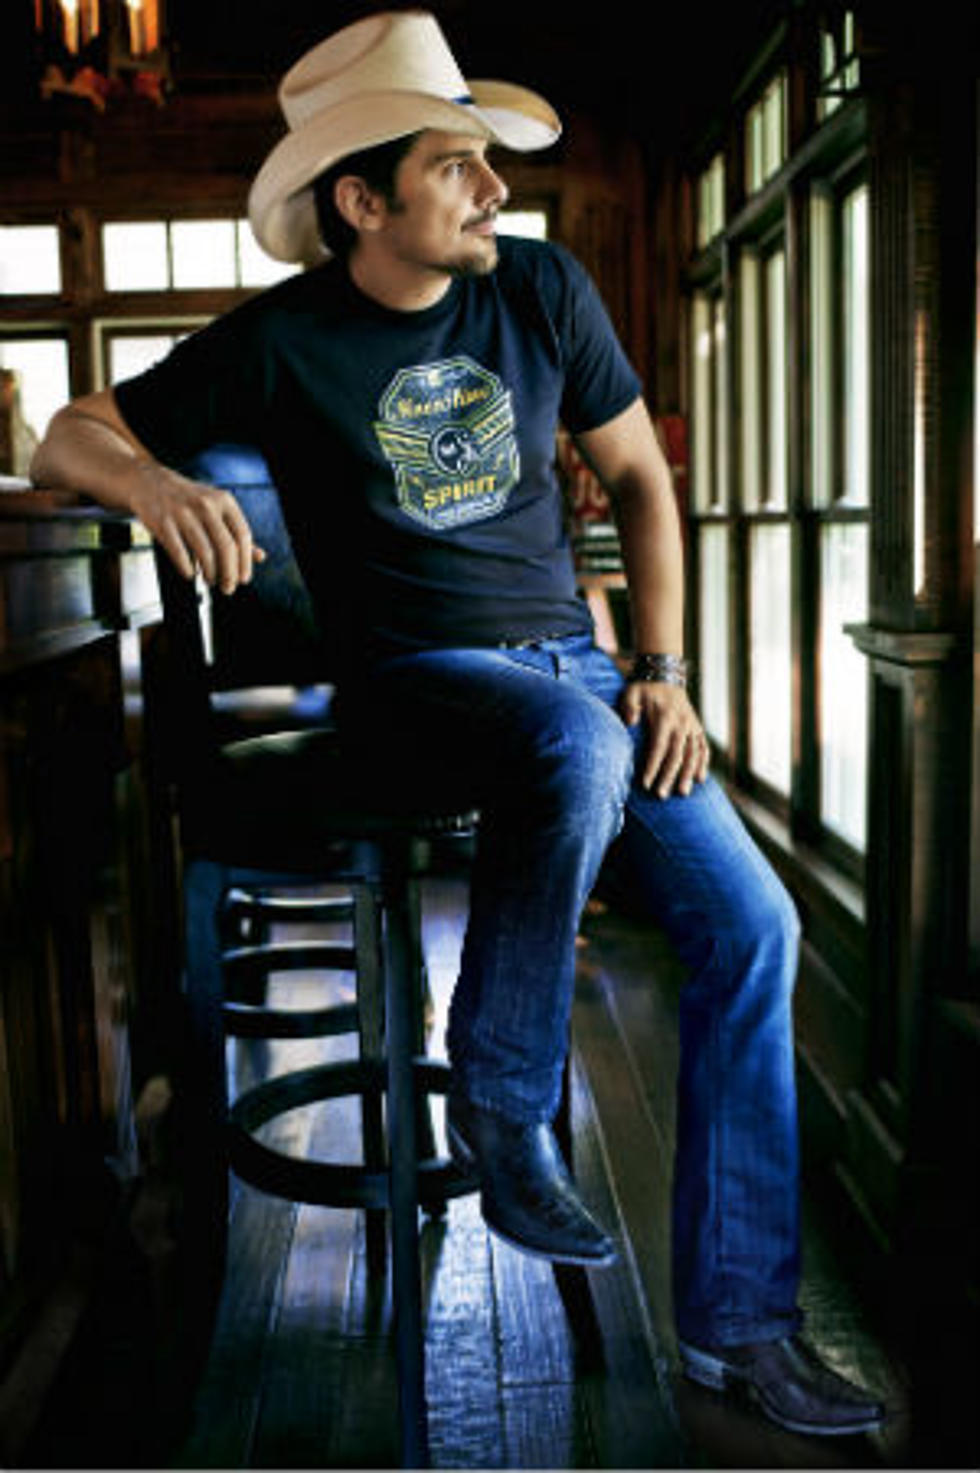 Brad Paisley Partners With Boot Barn to Launch Moonshine Spirit Clothing Line